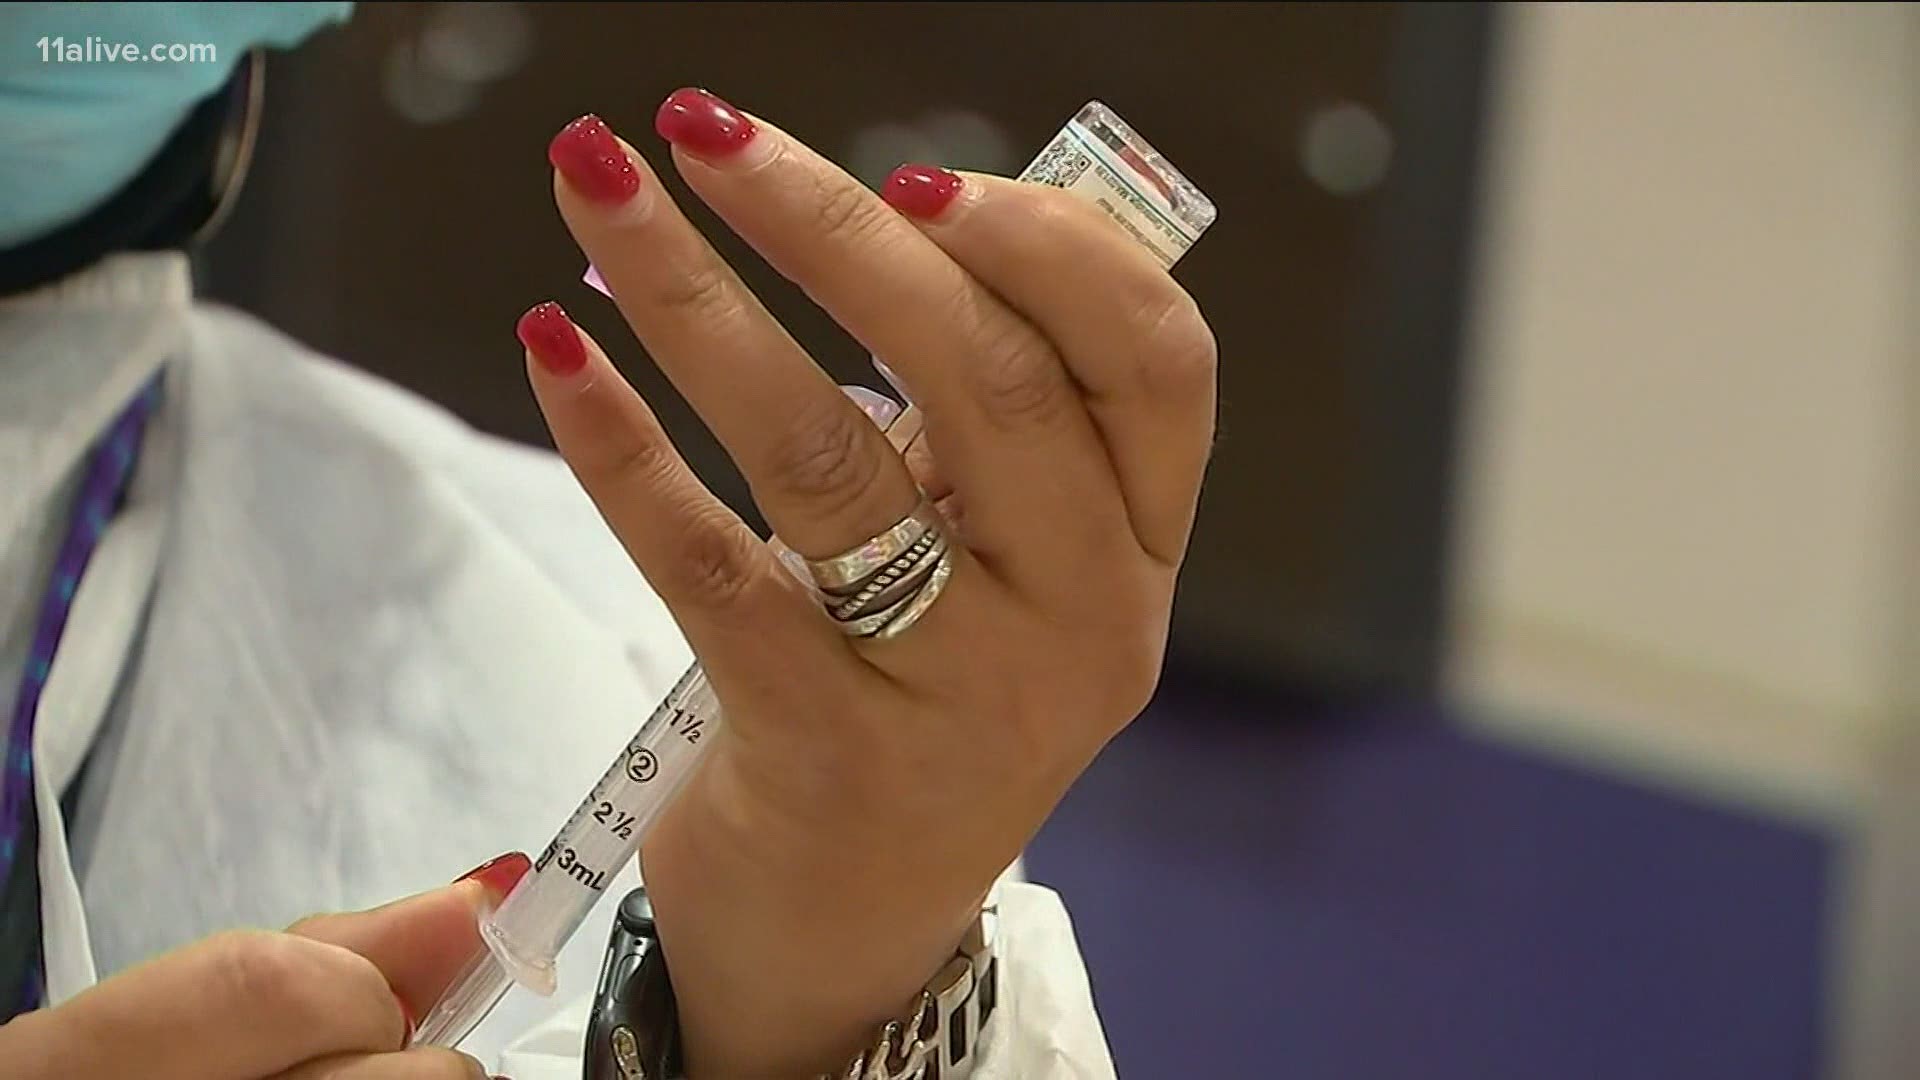 Globally, only 68% of adults say they would get vaccinated, according to a new poll released Monday.